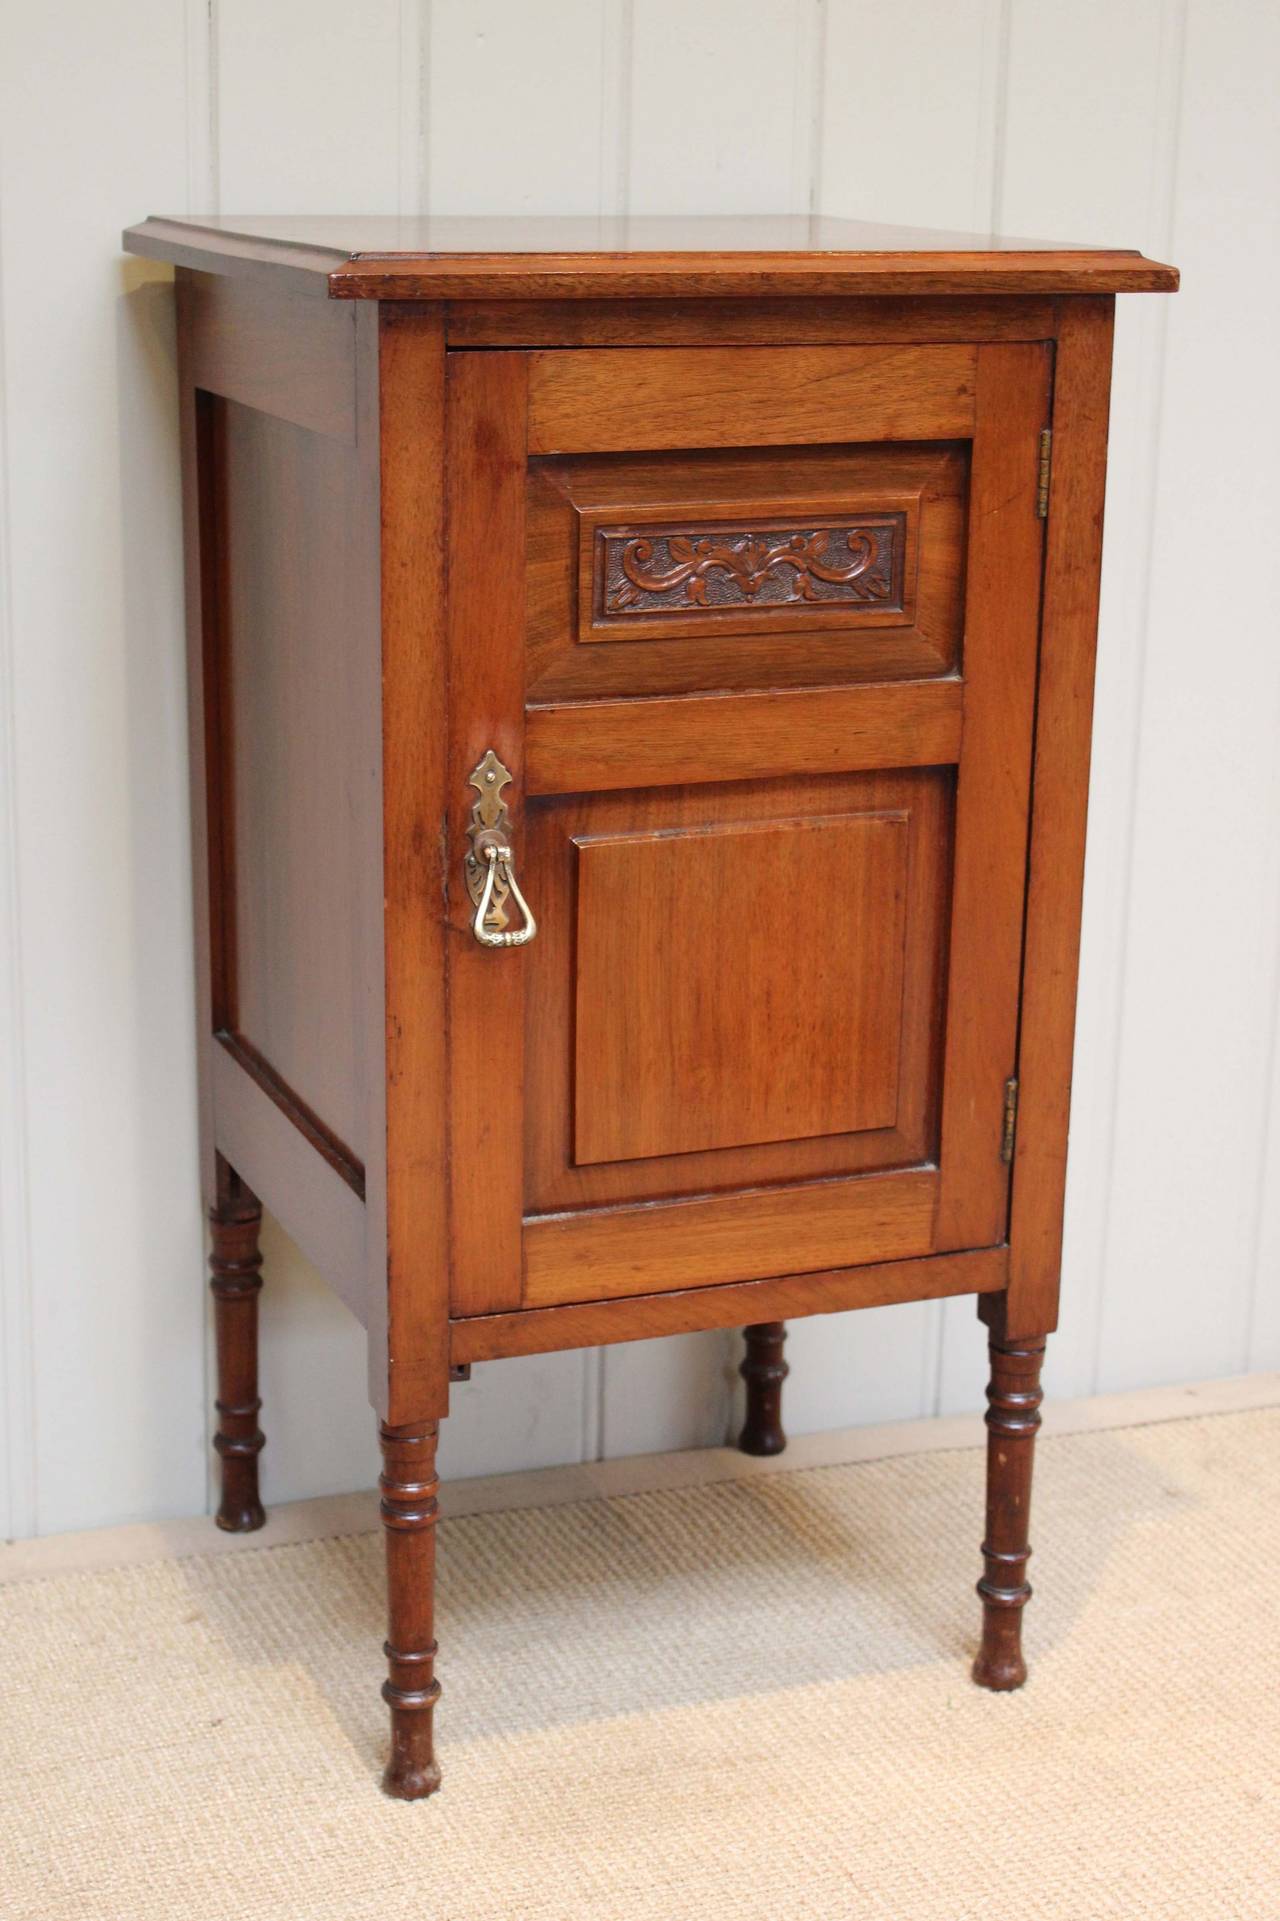 Edwardian walnut bedside cabinet having a single panelled door having a carved detail opening to reveal an interior shelf raised on turned wooden legs.